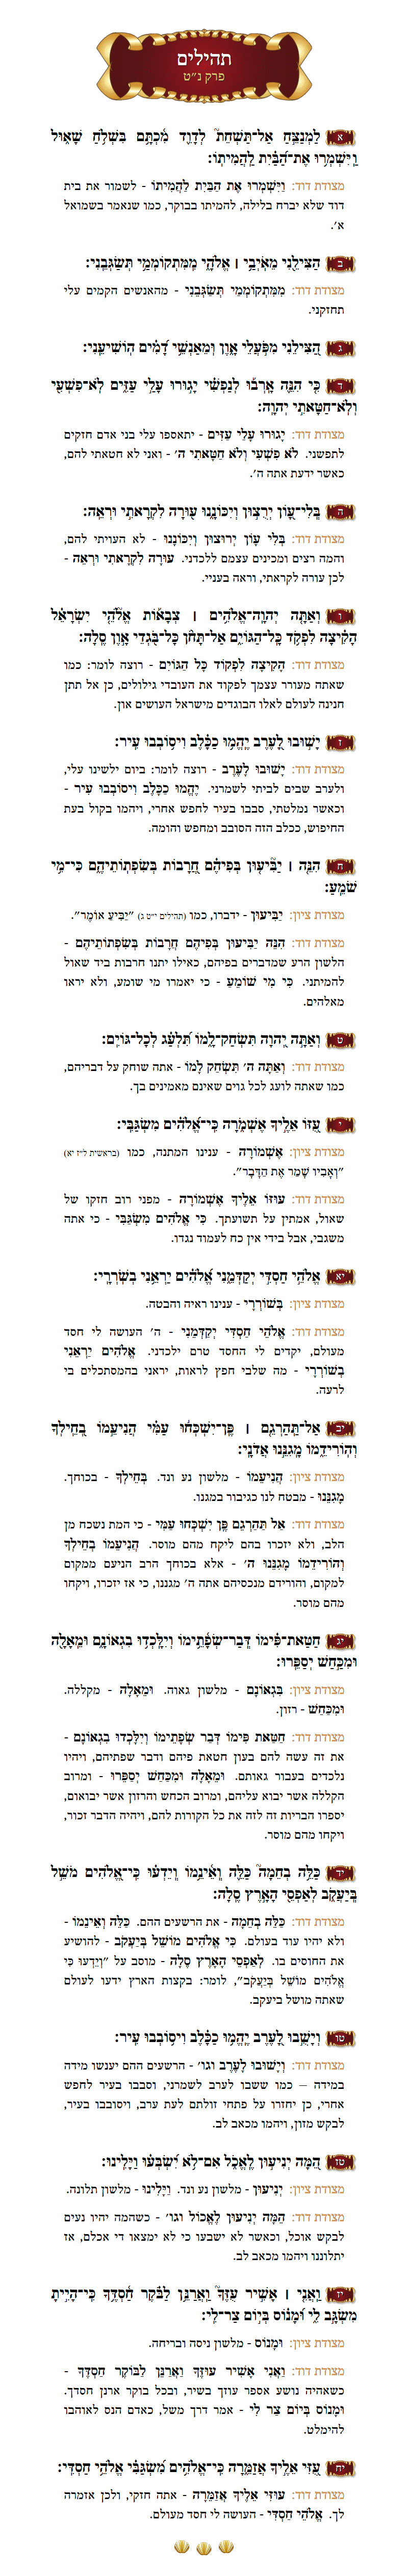 Sefer Tehillim Chapter 95 with commentary